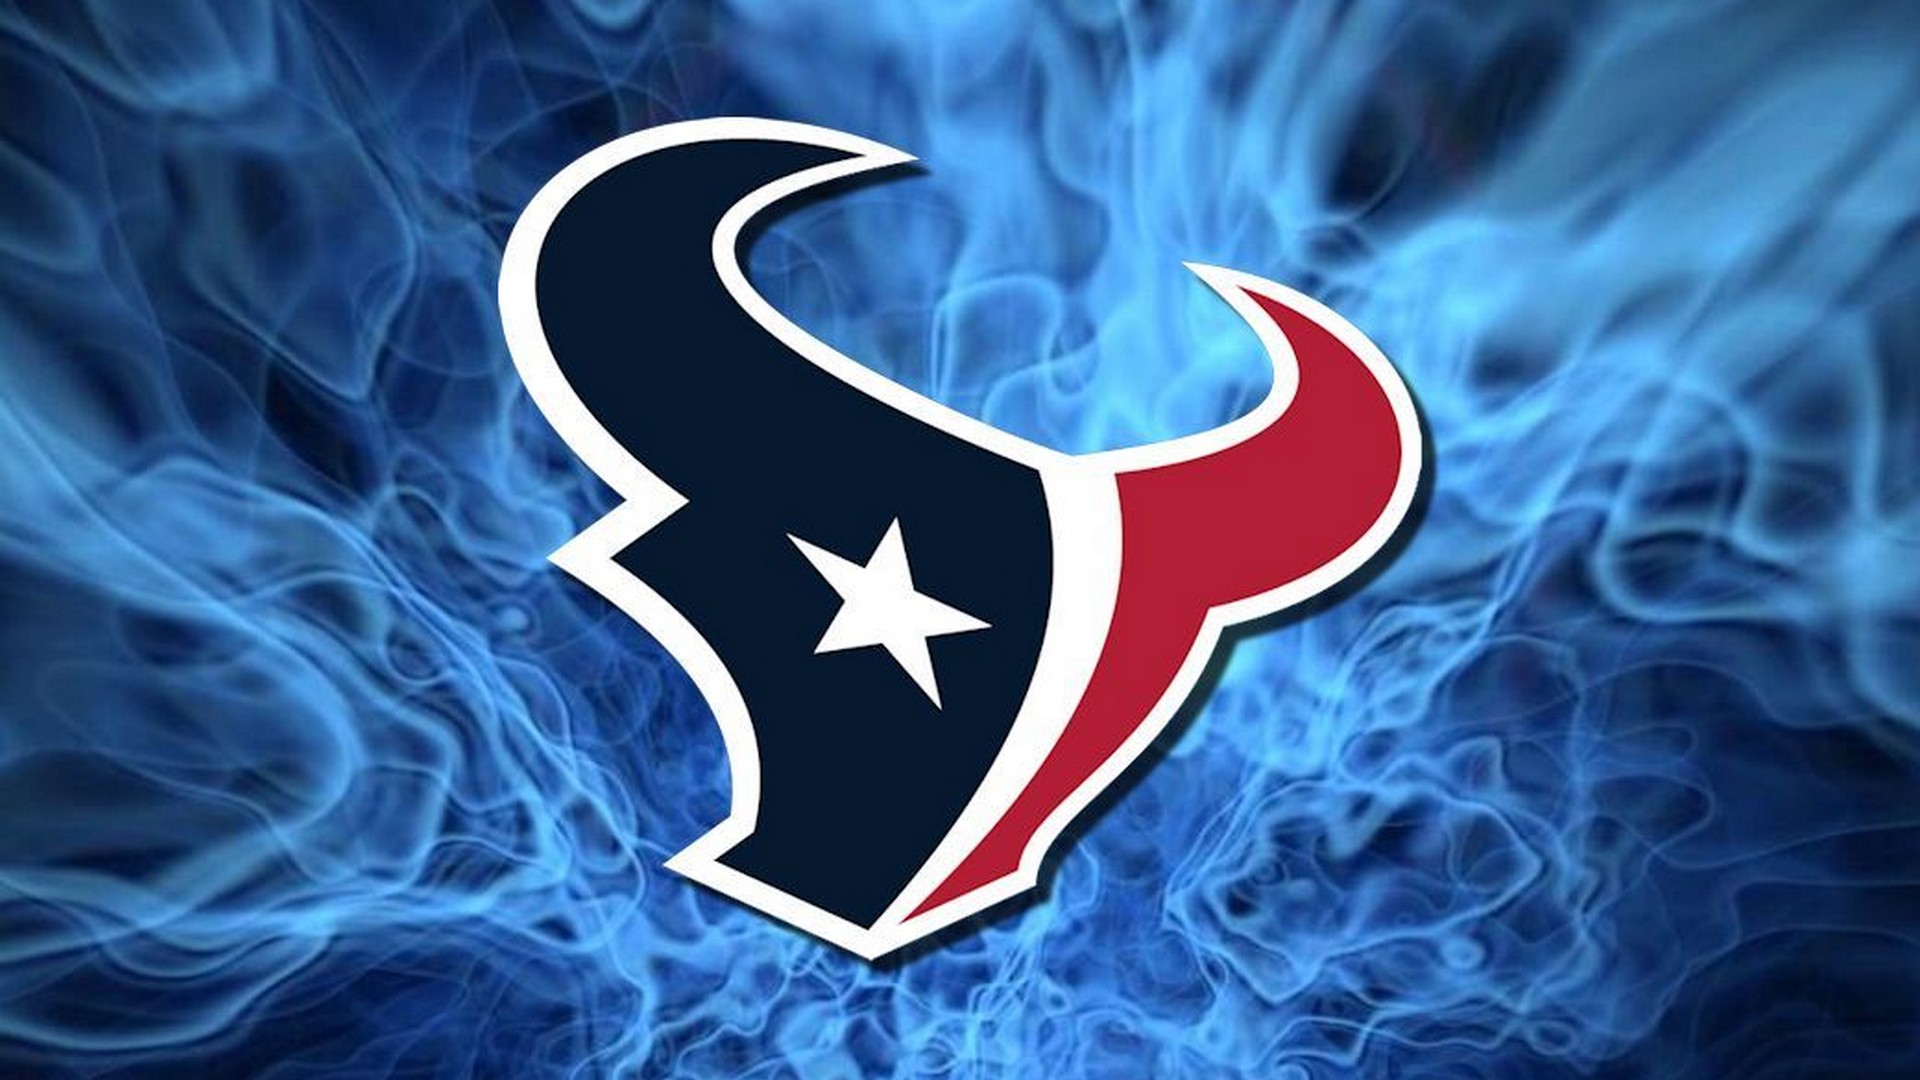 Houston Texans NFL For PC Wallpaper With Resolution 1920X1080 pixel. You can make this wallpaper for your Mac or Windows Desktop Background, iPhone, Android or Tablet and another Smartphone device for free